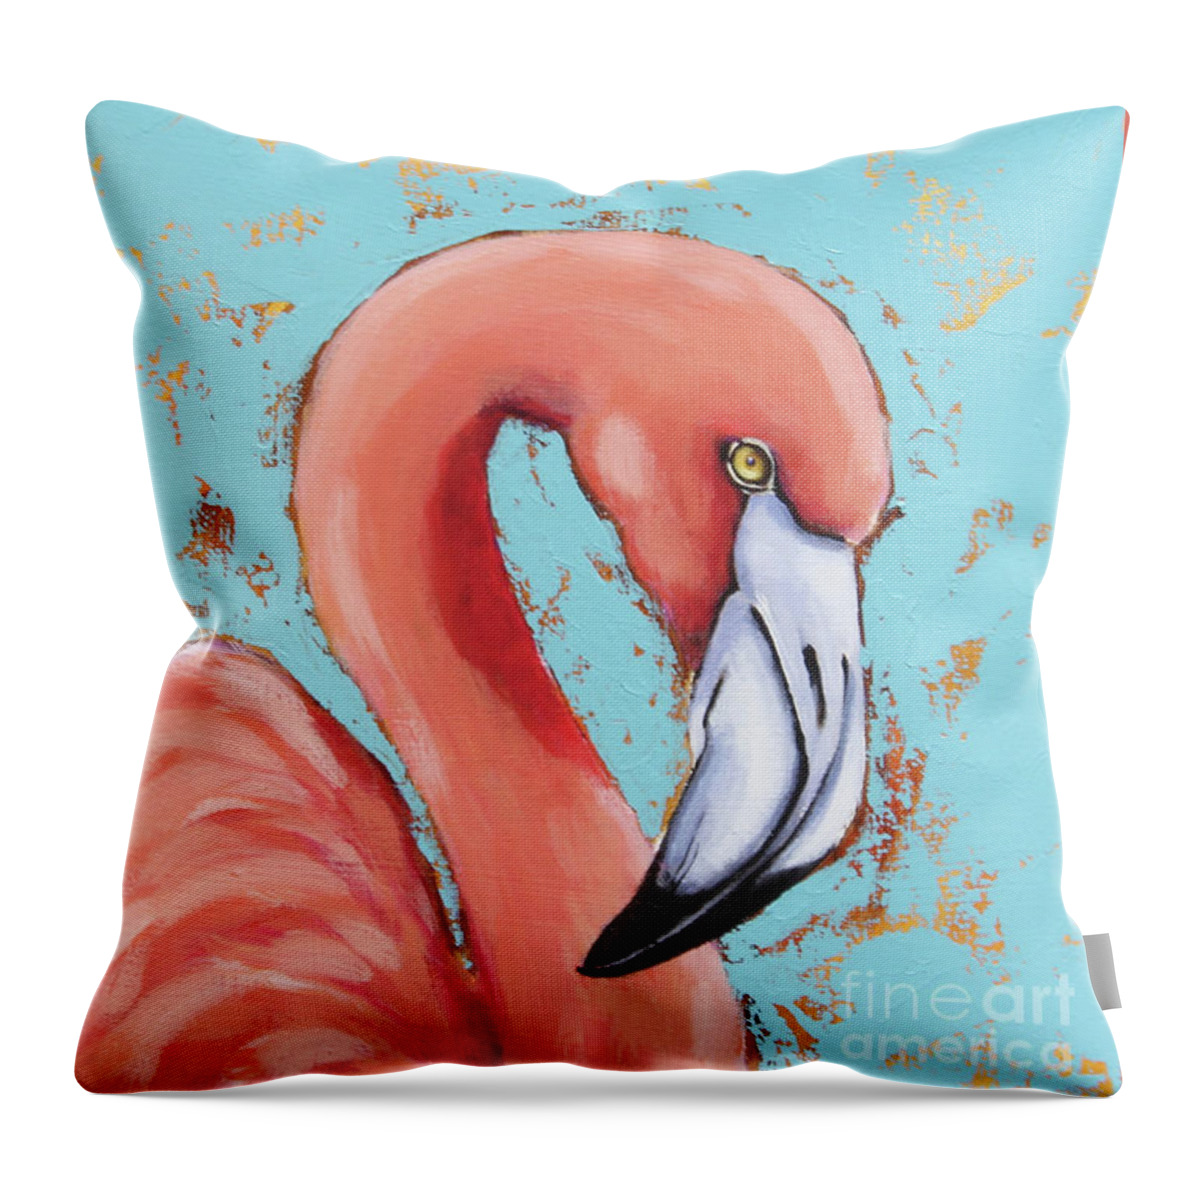 Flamingo Throw Pillow featuring the painting Little Flamingo by Lucia Stewart